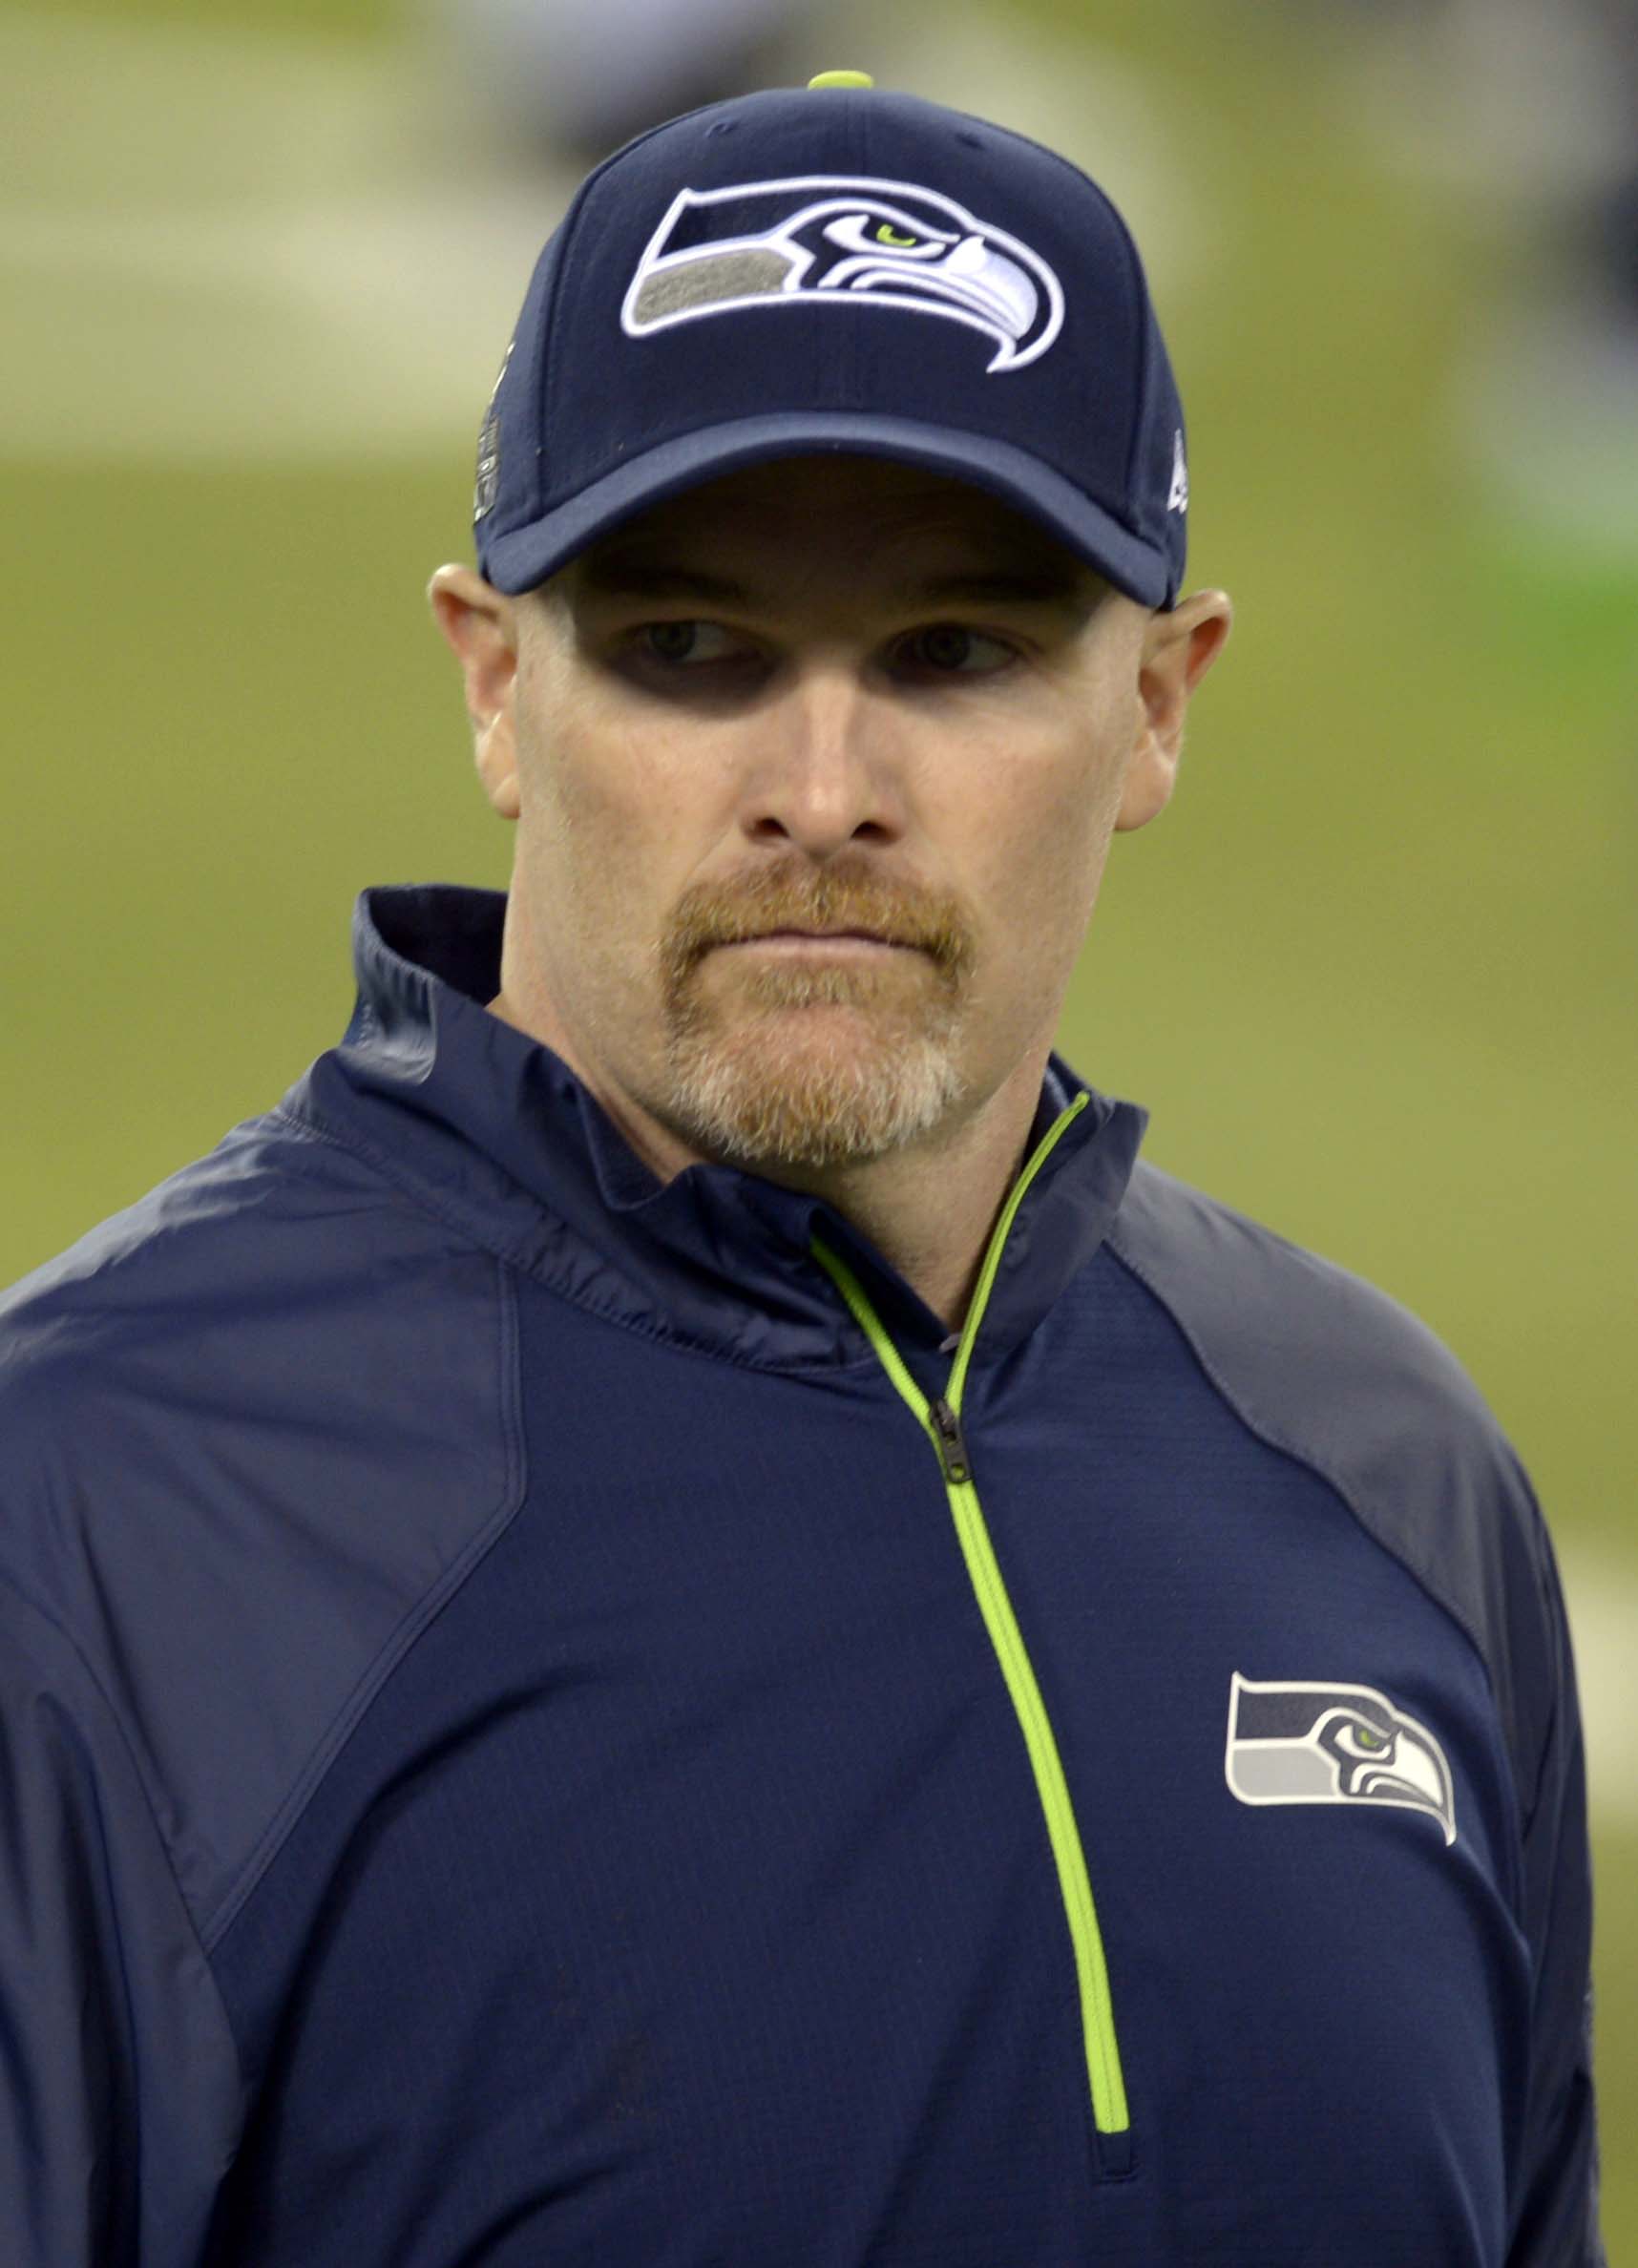 Dan Quinn to interview with Falcons tomorrow, Seahawks win means he can't  yet be hired - The Falcoholic